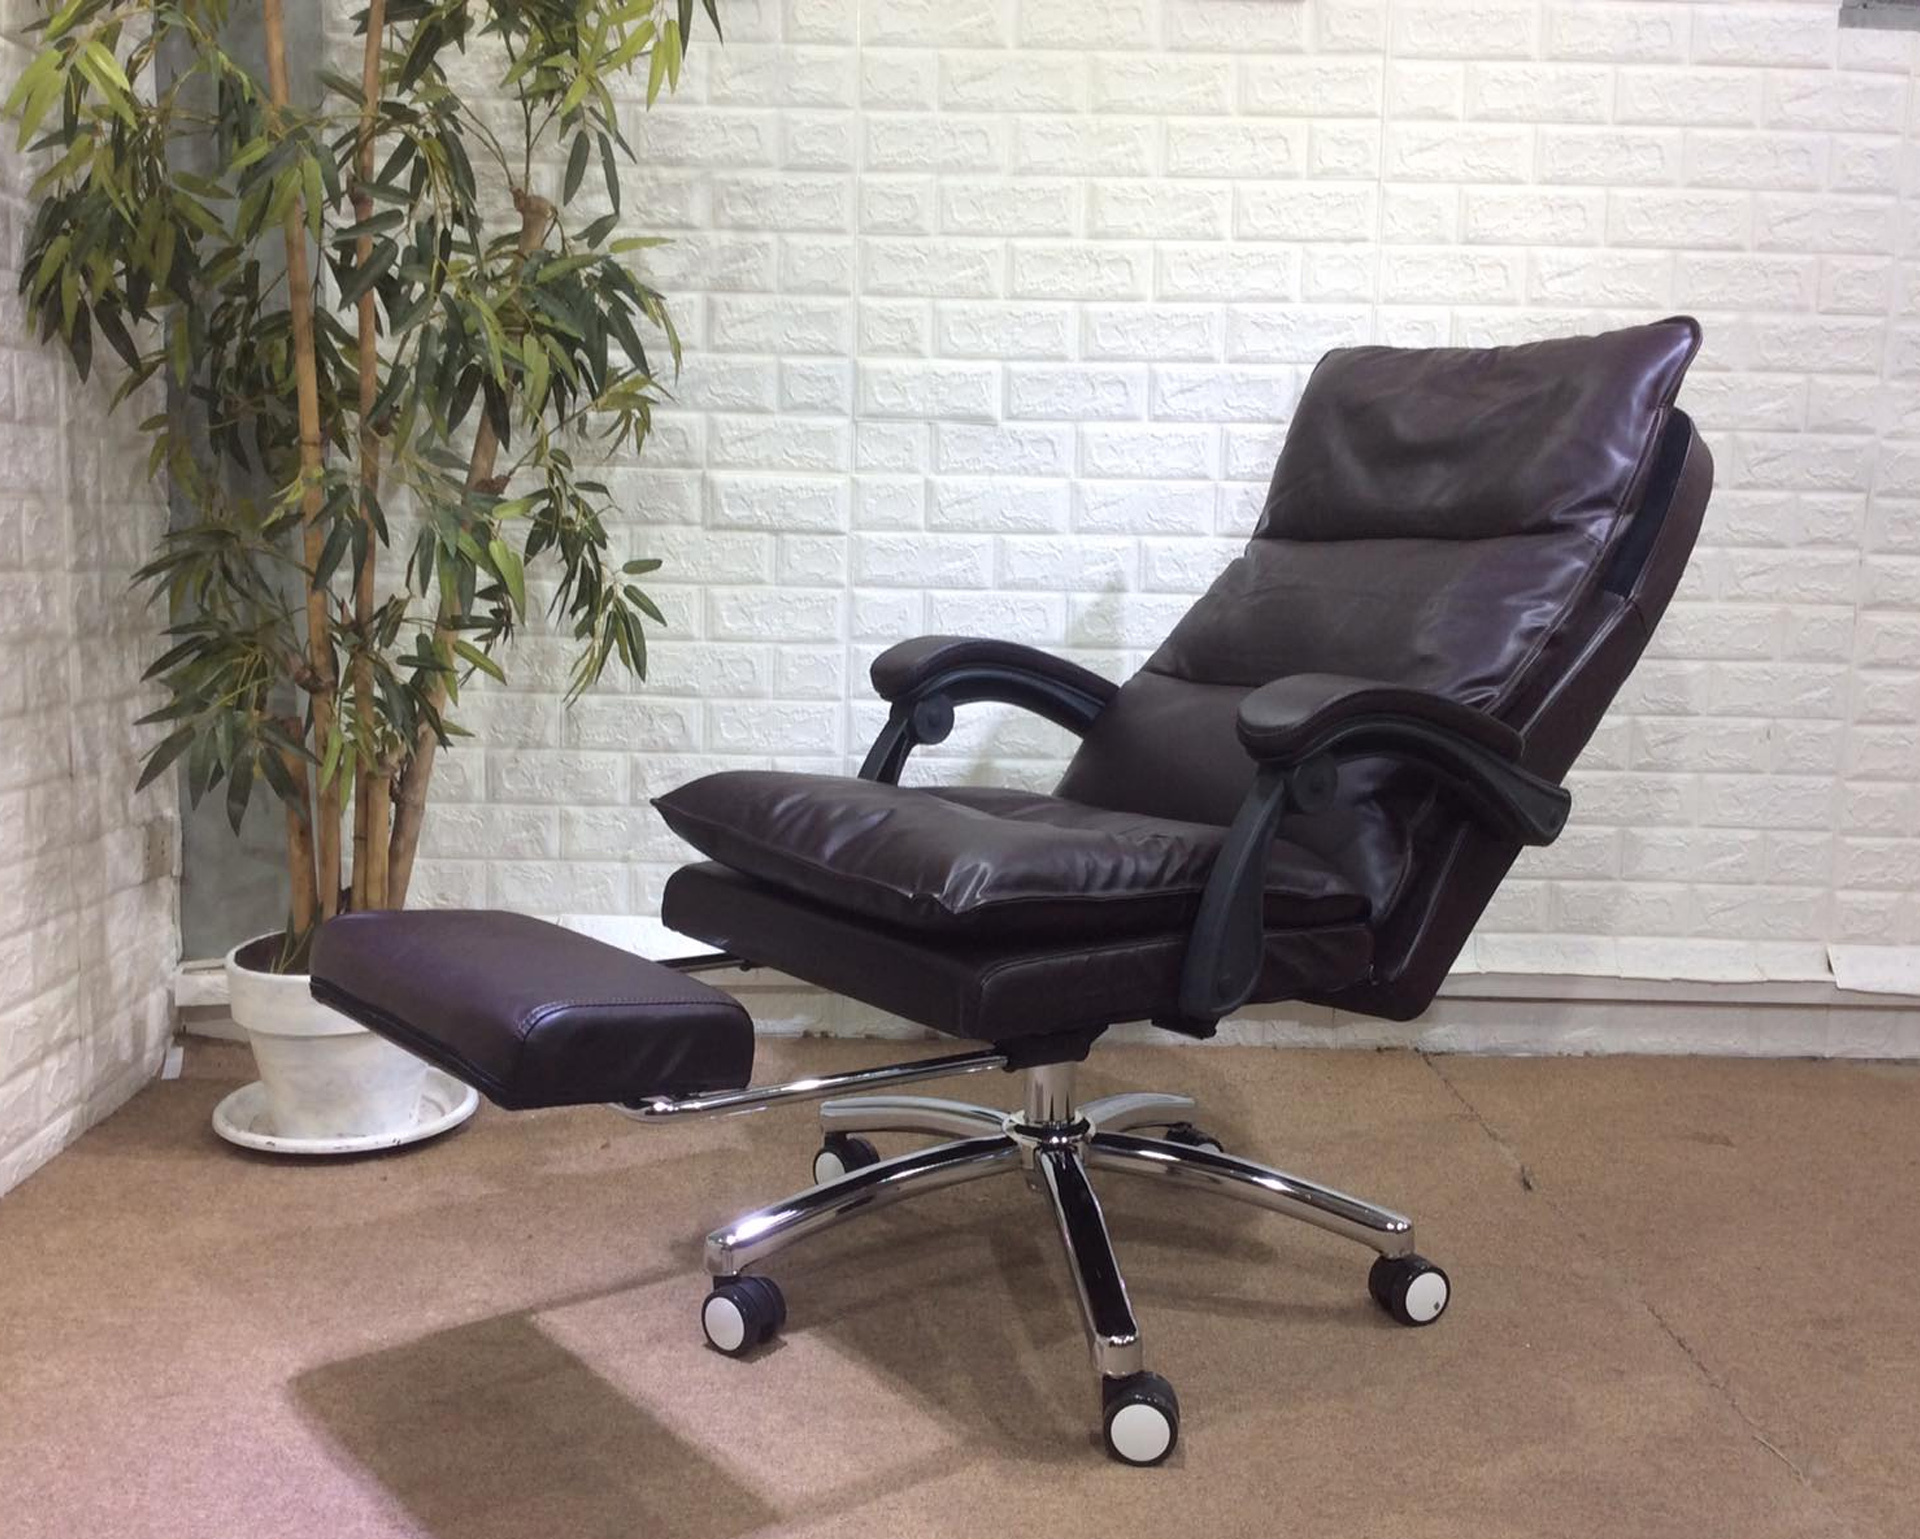 Office chairs - Ofix Premium 702A Office Massage Chair